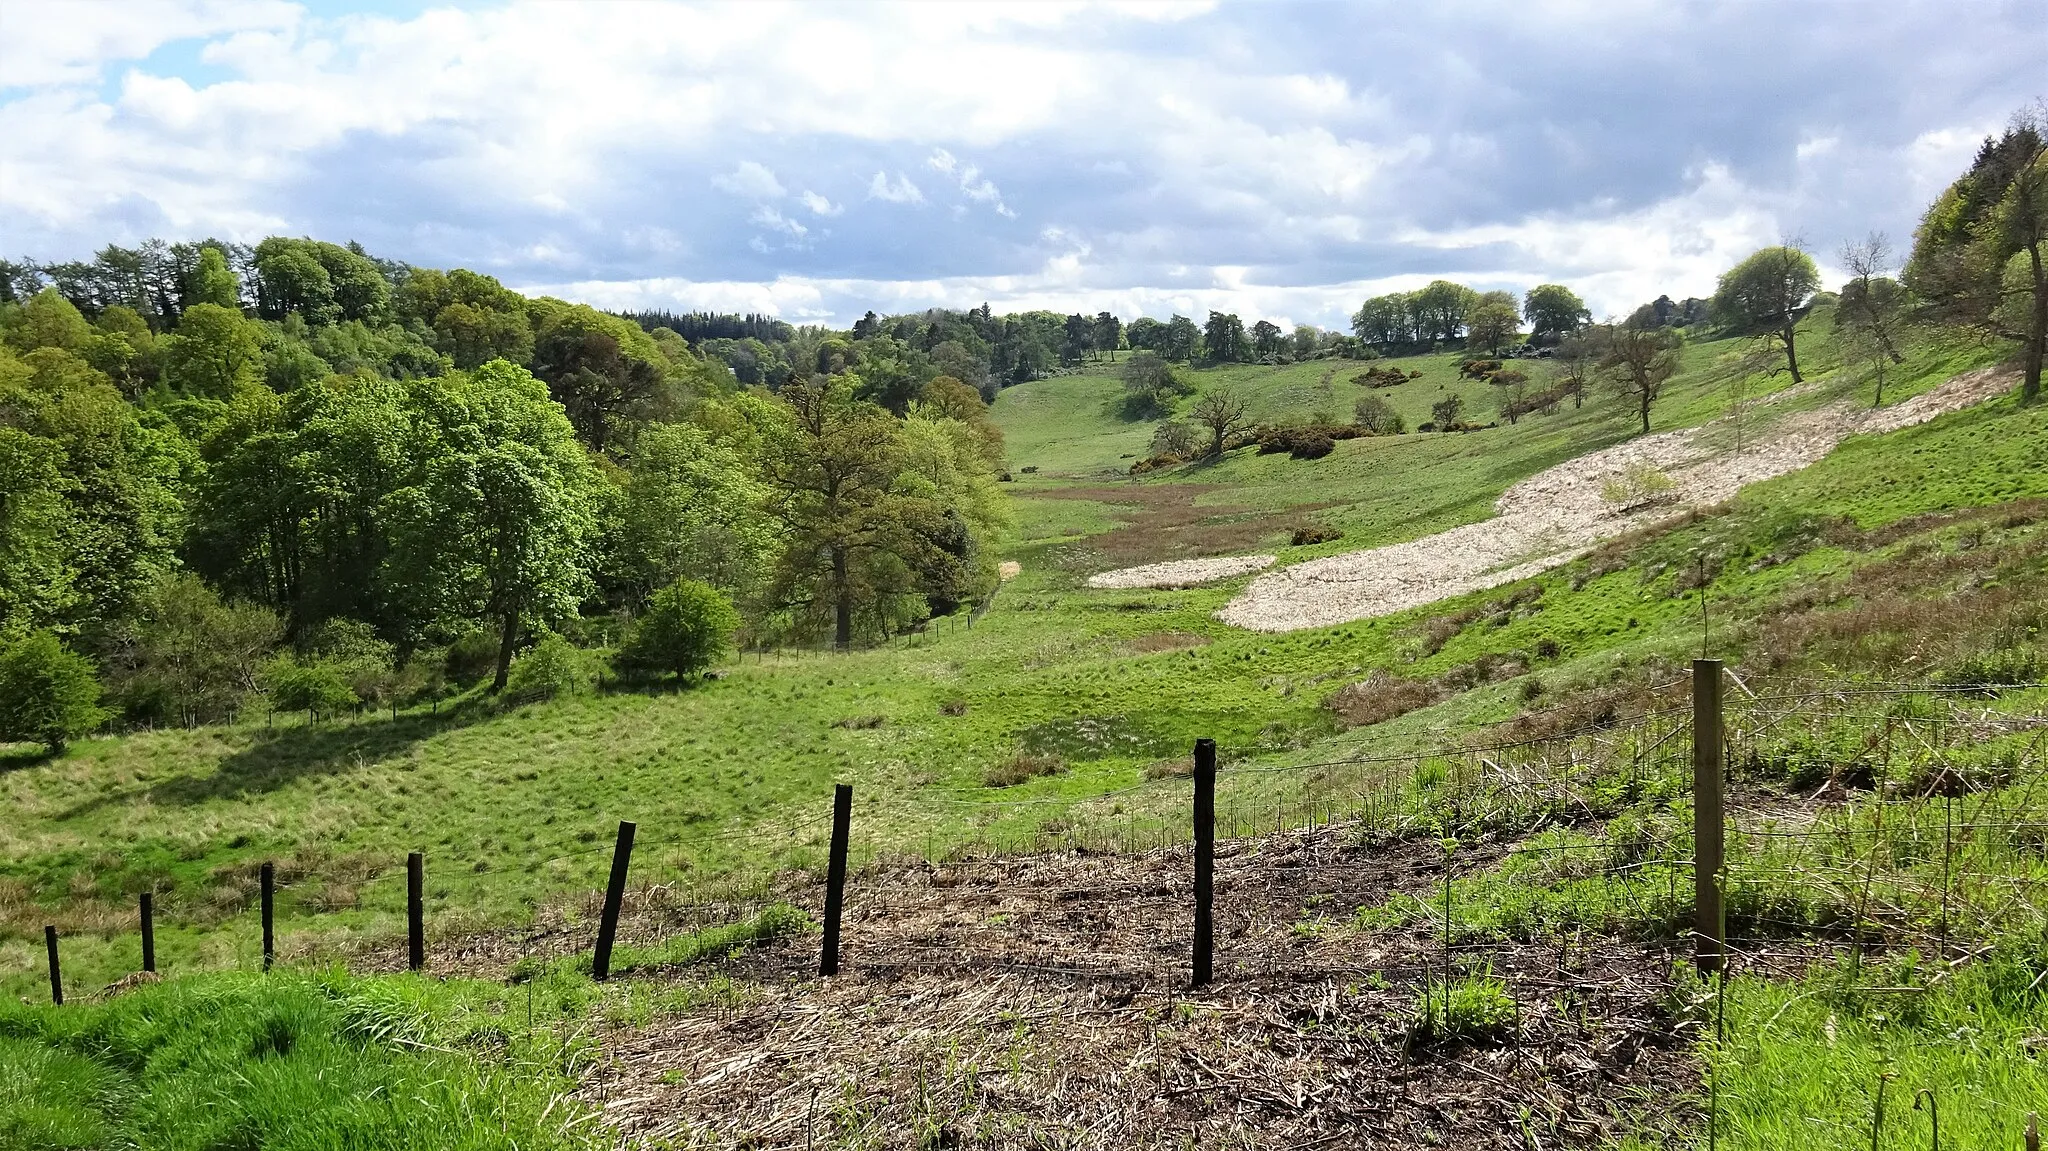 Photo showing: The Hewan Bog from Hewan Bank, Roslin, Midlothian, Scotland. The main site of the Battle of Roslin was just over the ridge to the right. The North Esk Water lies hidden in the trees to the left.